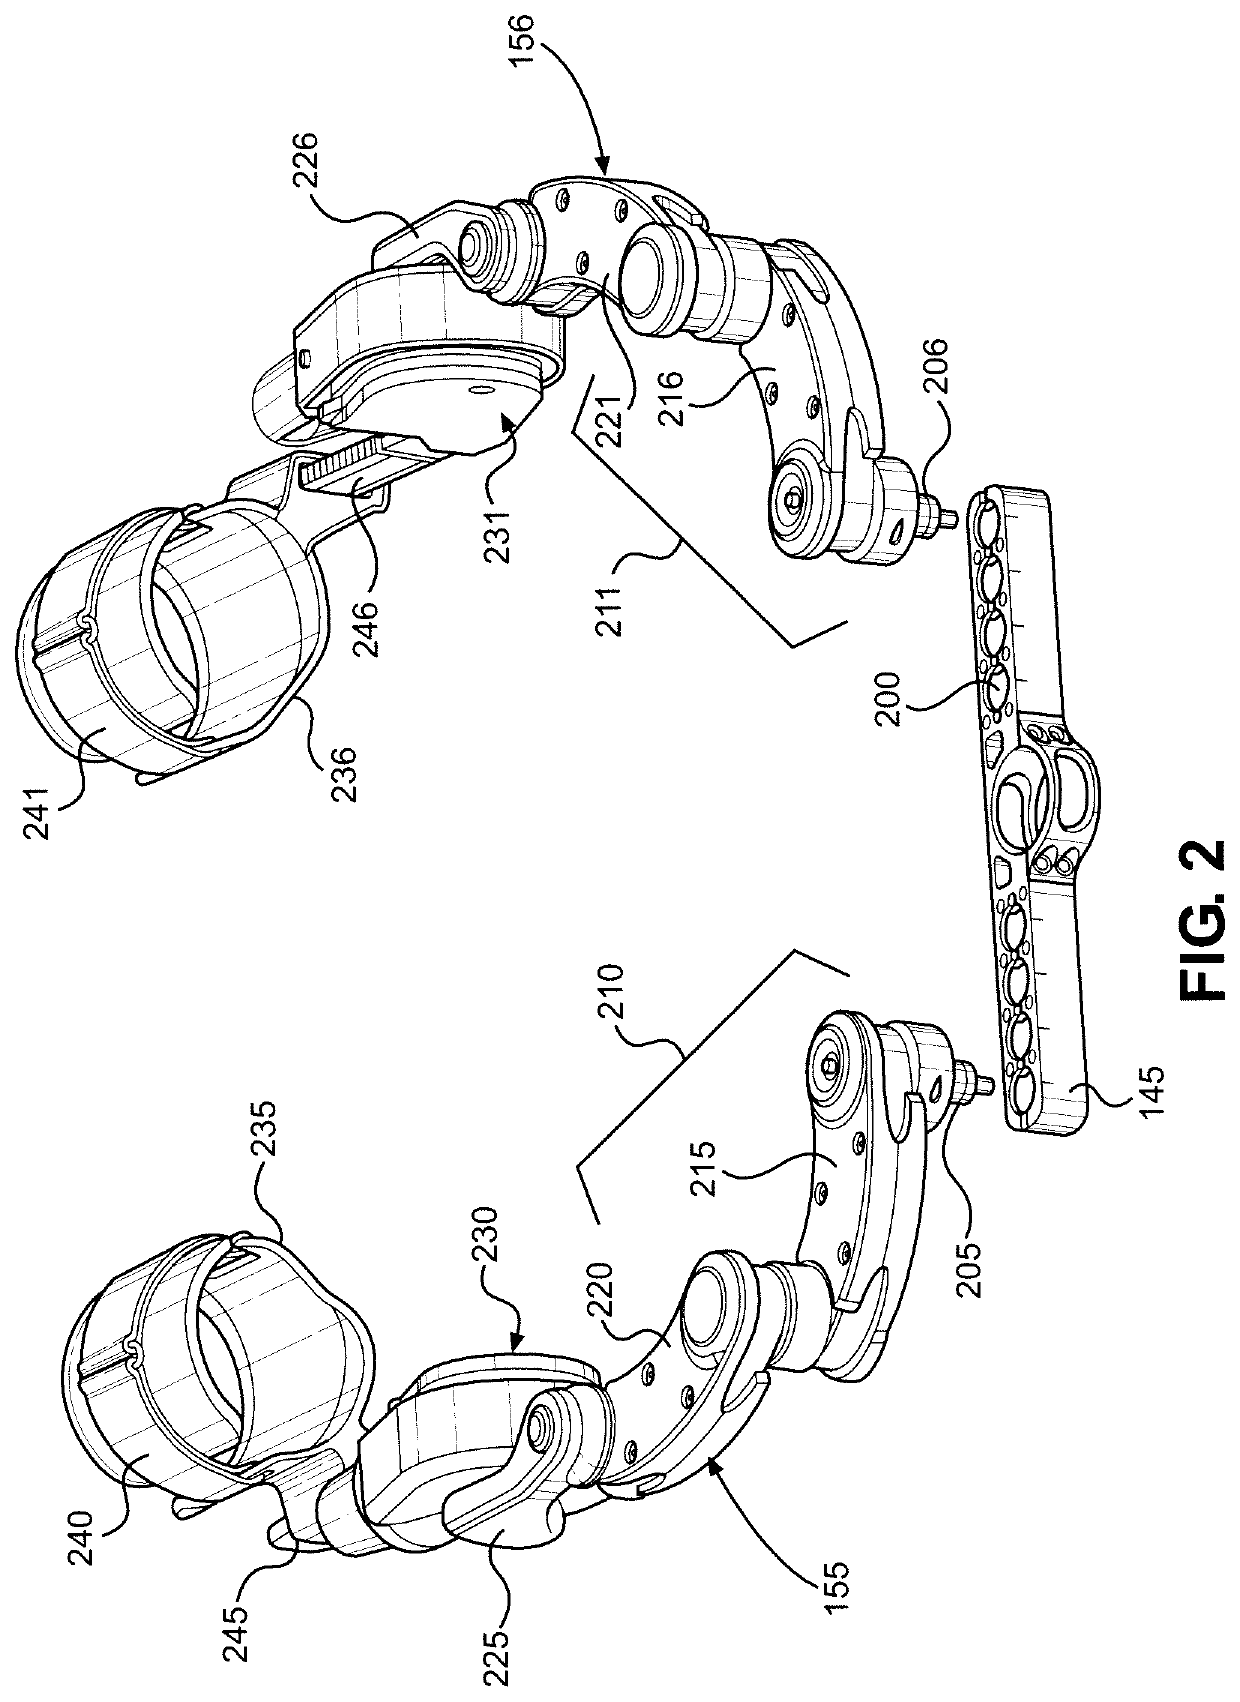 Exoskeleton and method of providing an assistive torque to an arm of a wearer